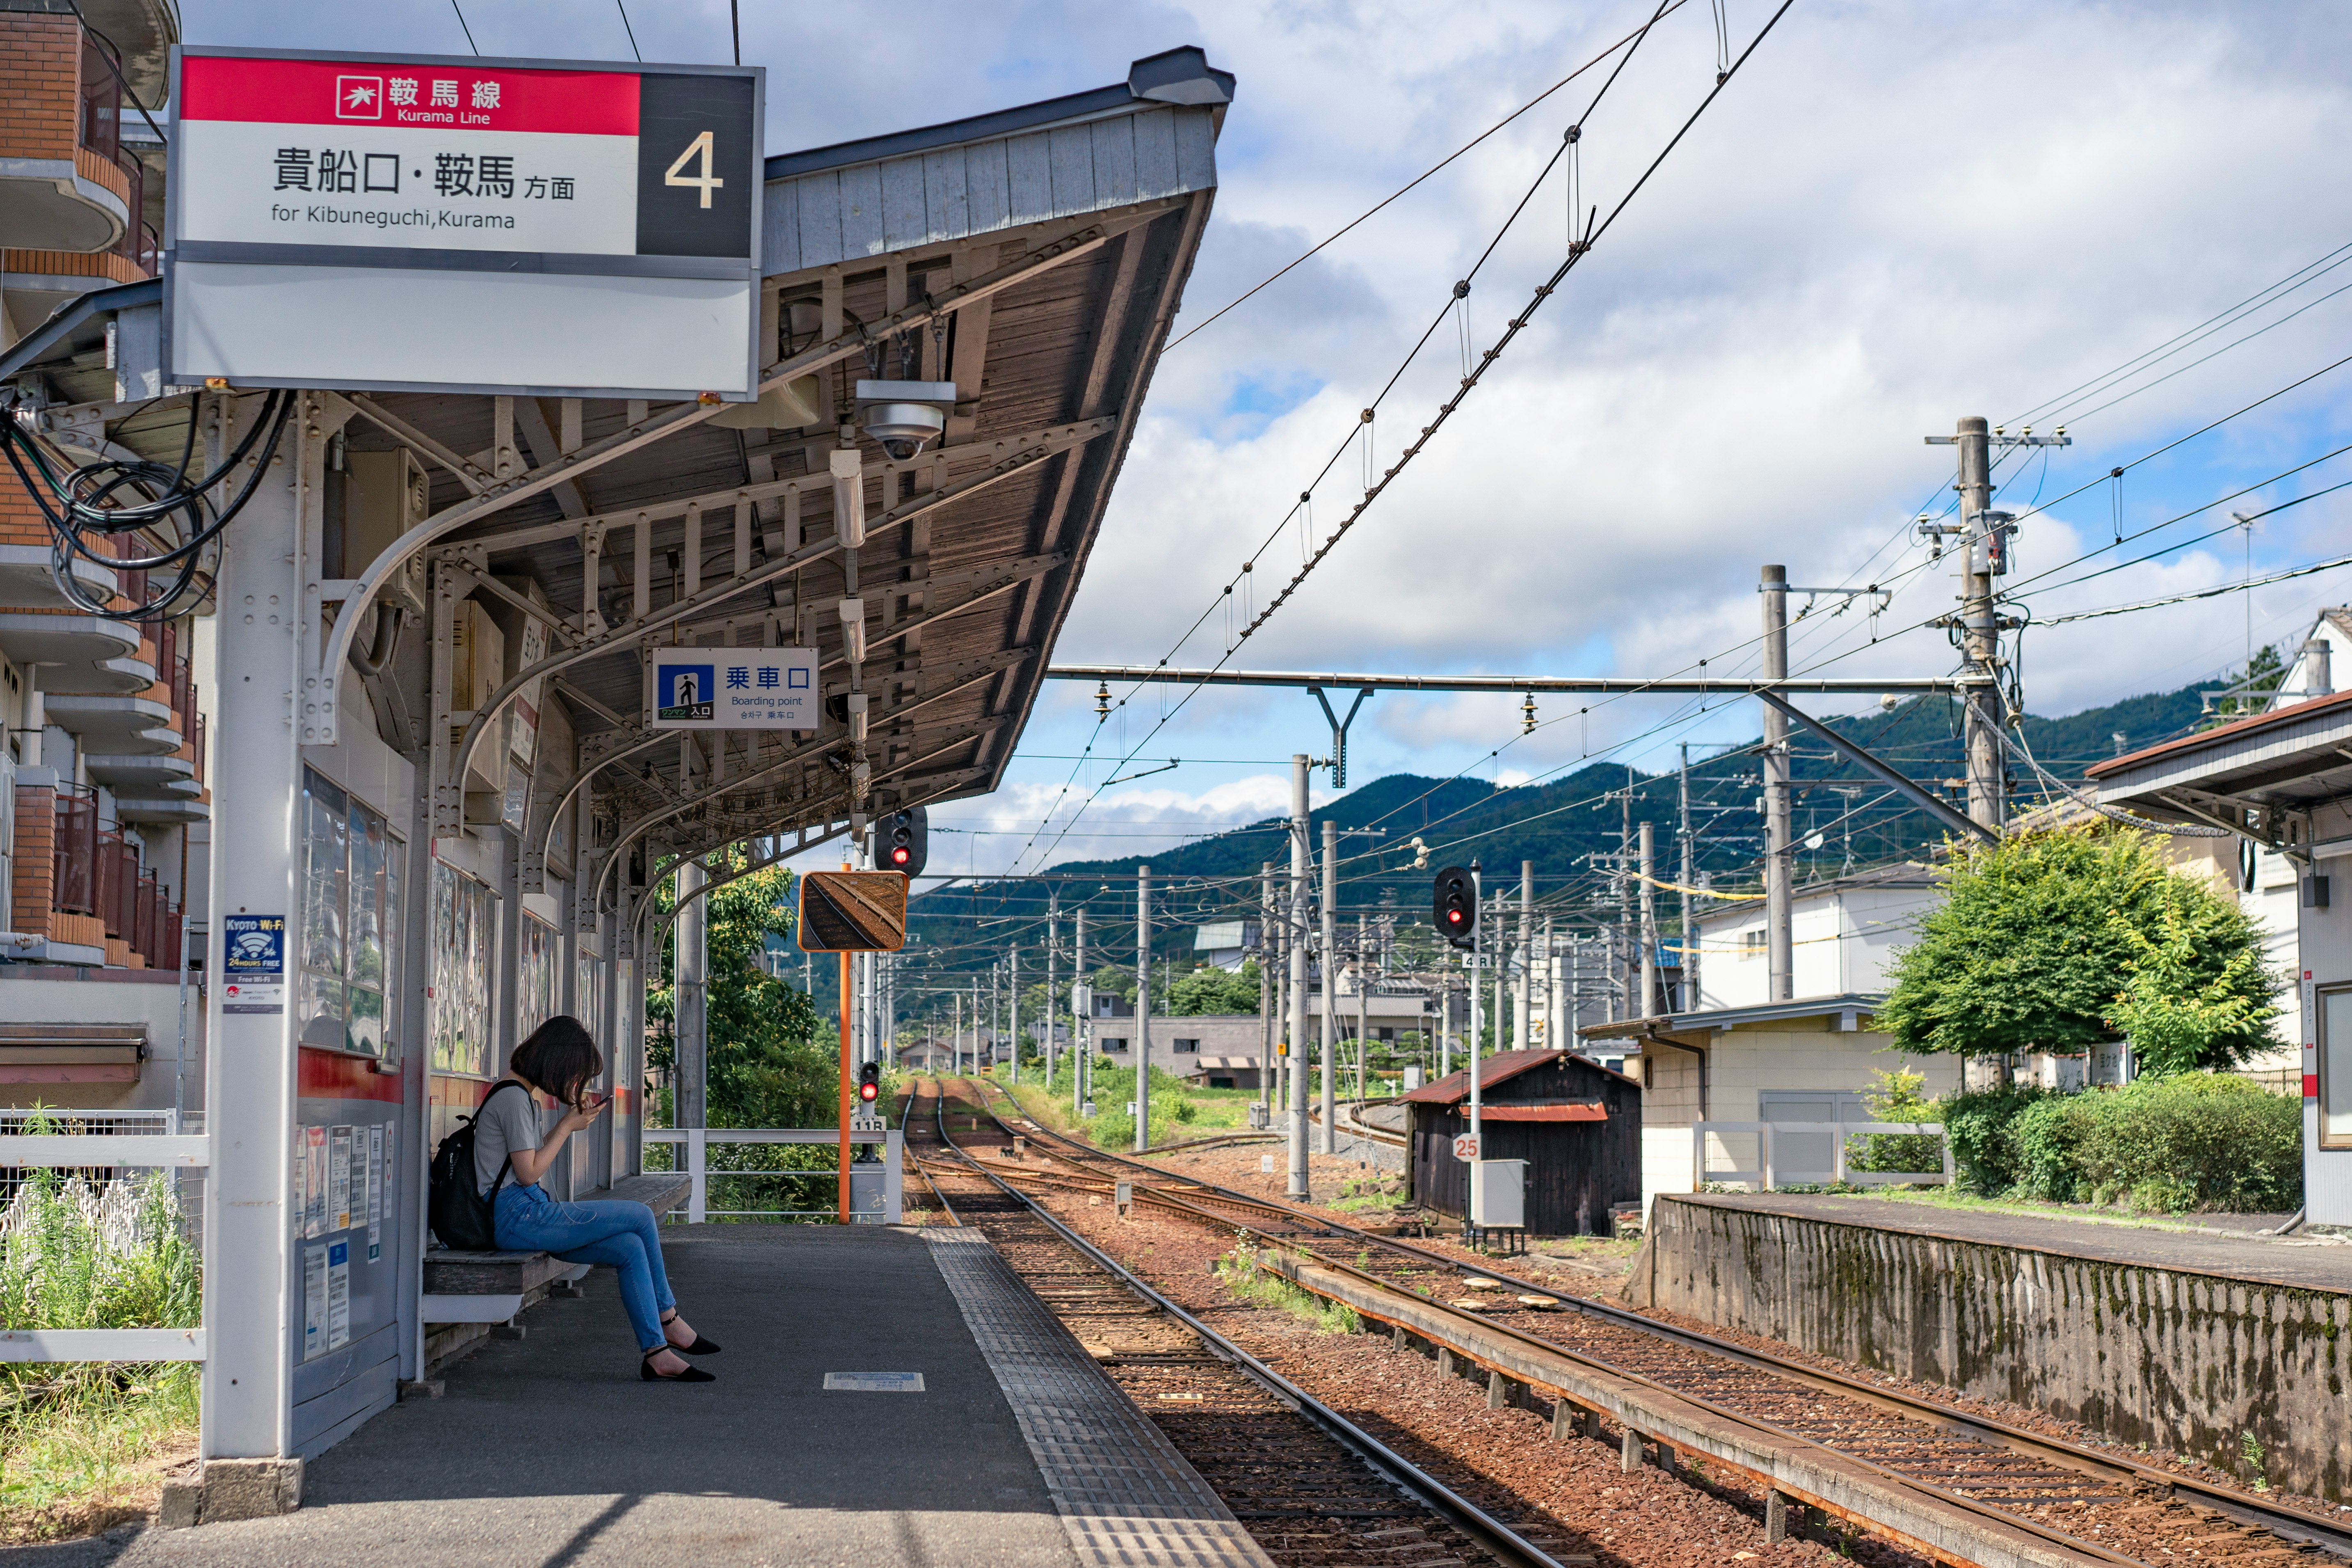 woman sitting on canopy while waiting train